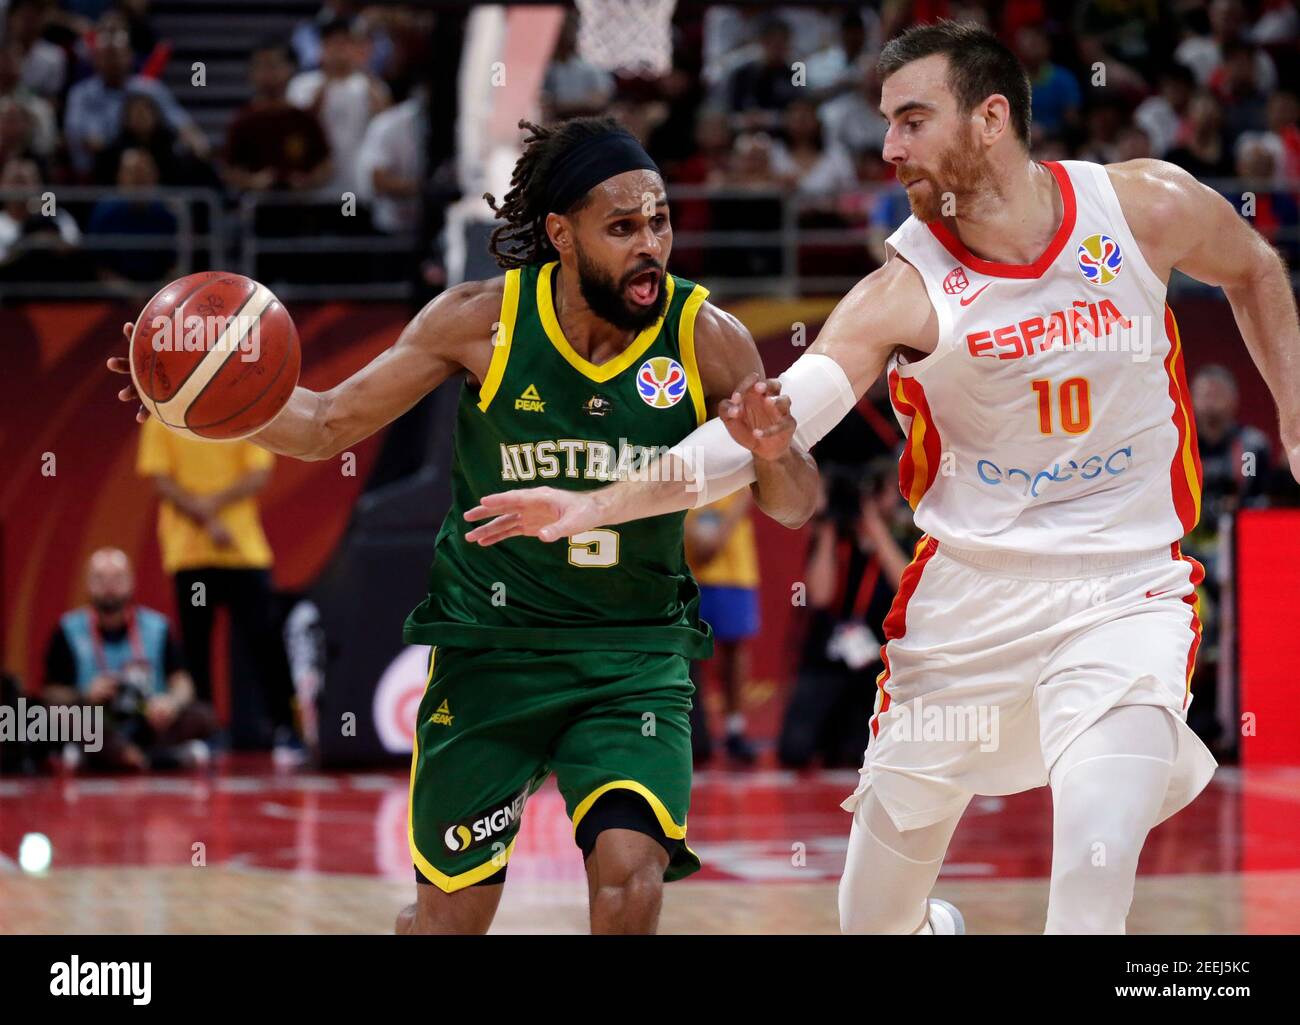 Basketball - FIBA World Cup - Semi Finals - Spain v Australia - Wukesong Sport Arena, Beijing, China - September 13, 2019  Australia's Patty Mills in action with Spain's Victor Claver REUTERS/Jason Lee Stock Photo